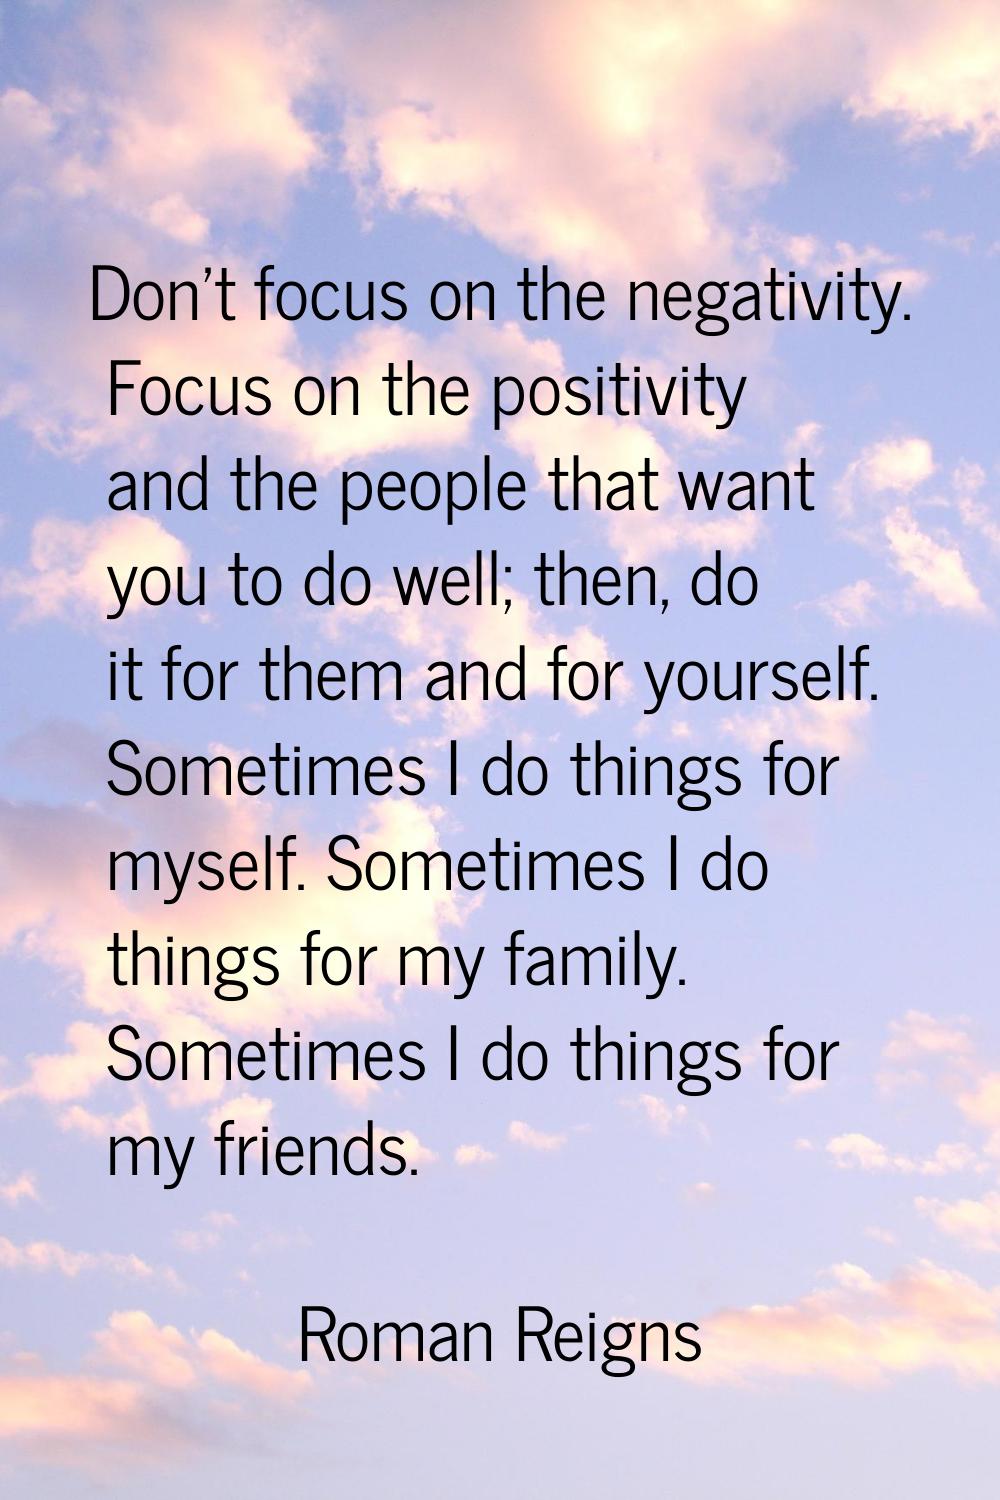 Don't focus on the negativity. Focus on the positivity and the people that want you to do well; the